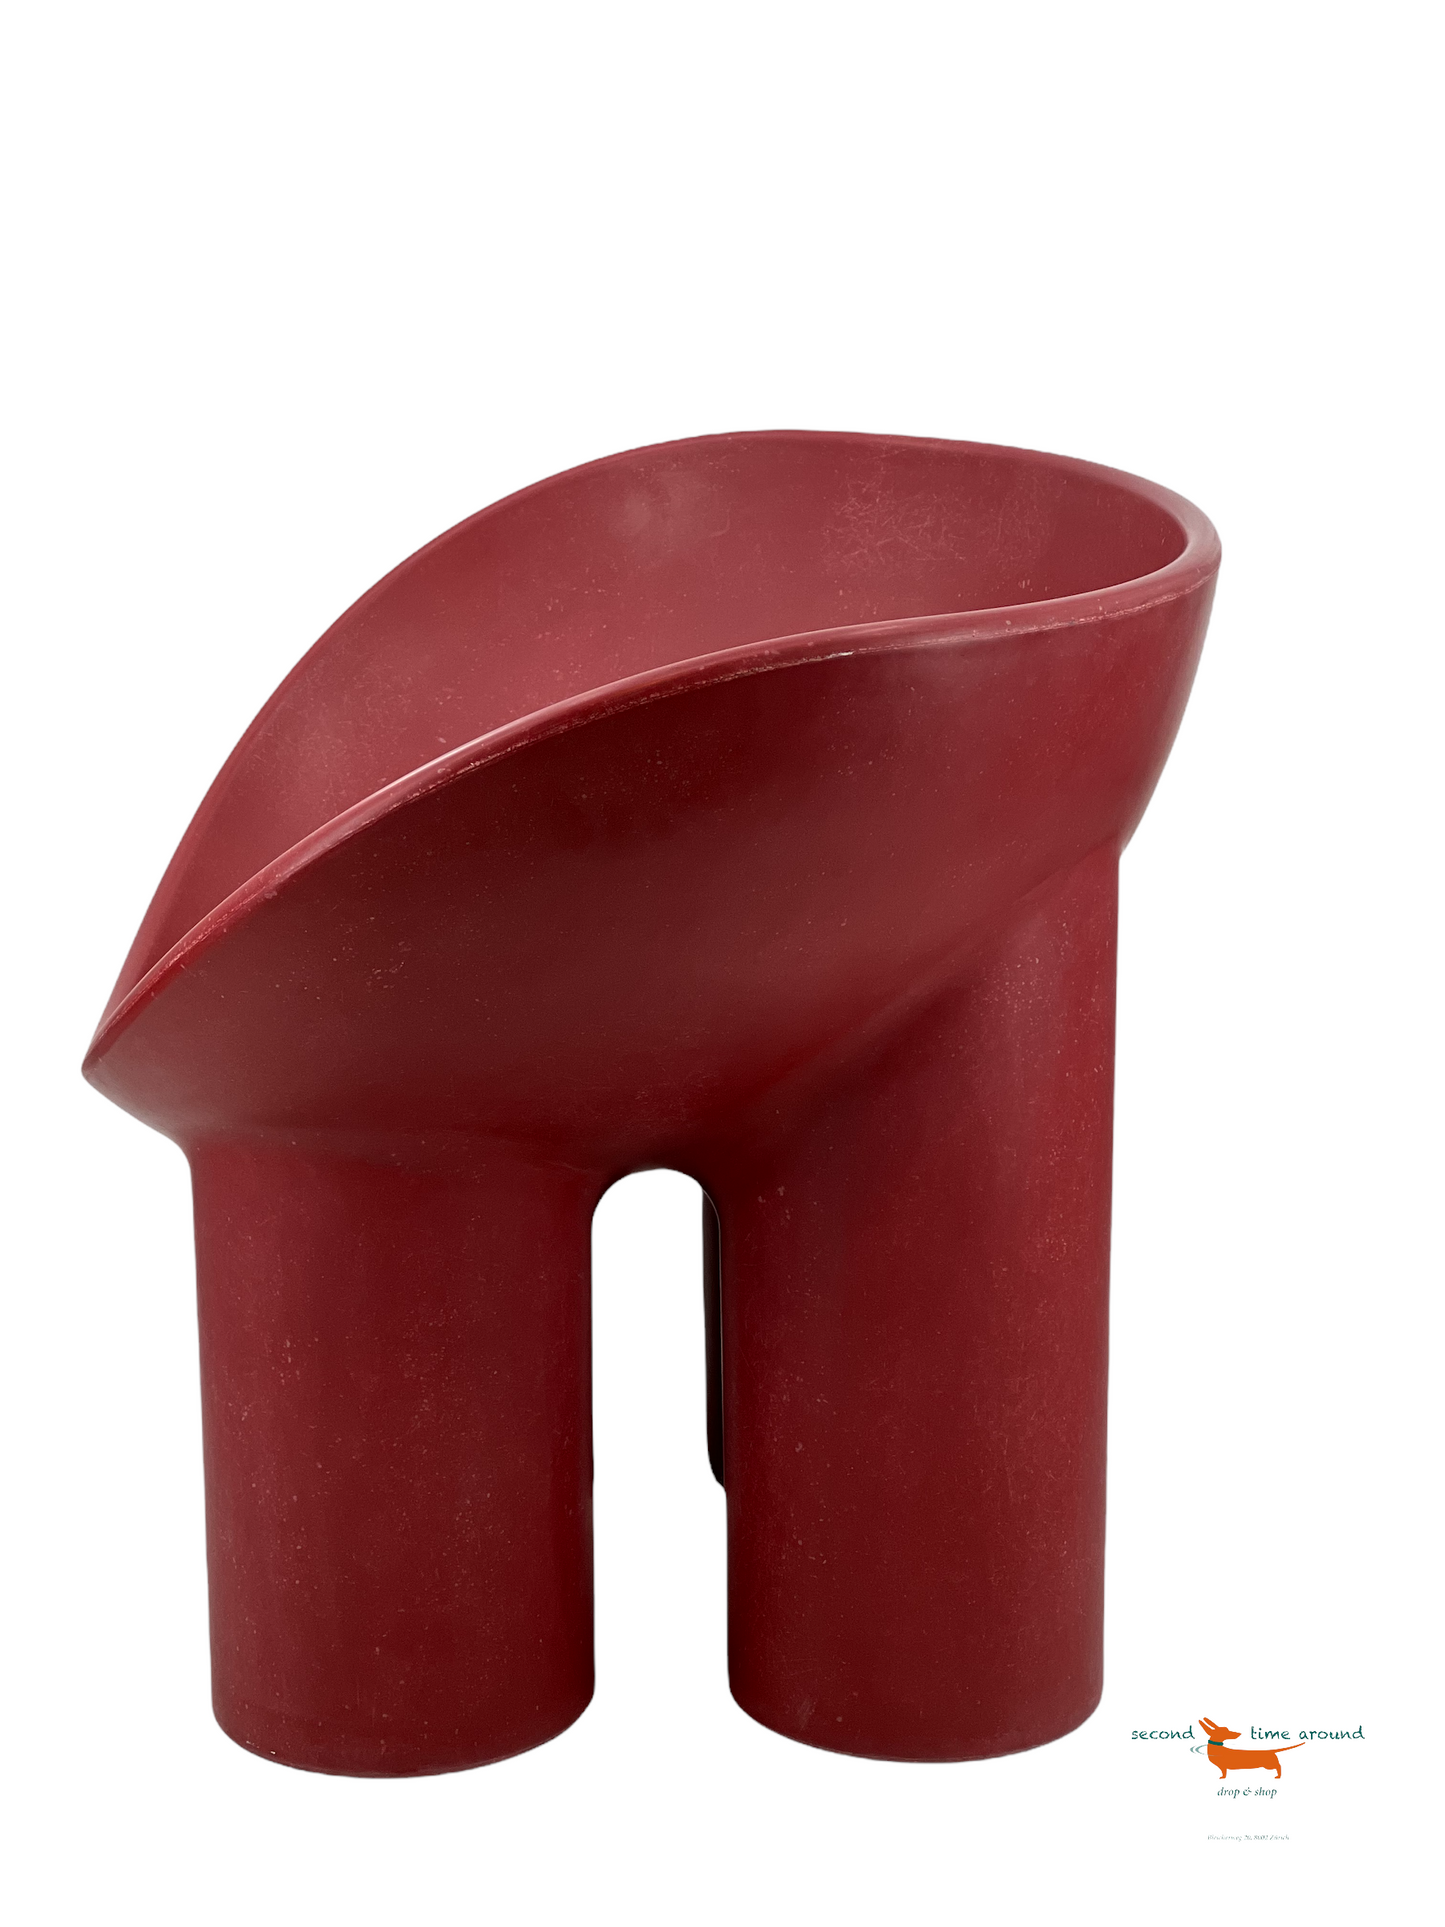 Roly Poly Chair - Driade